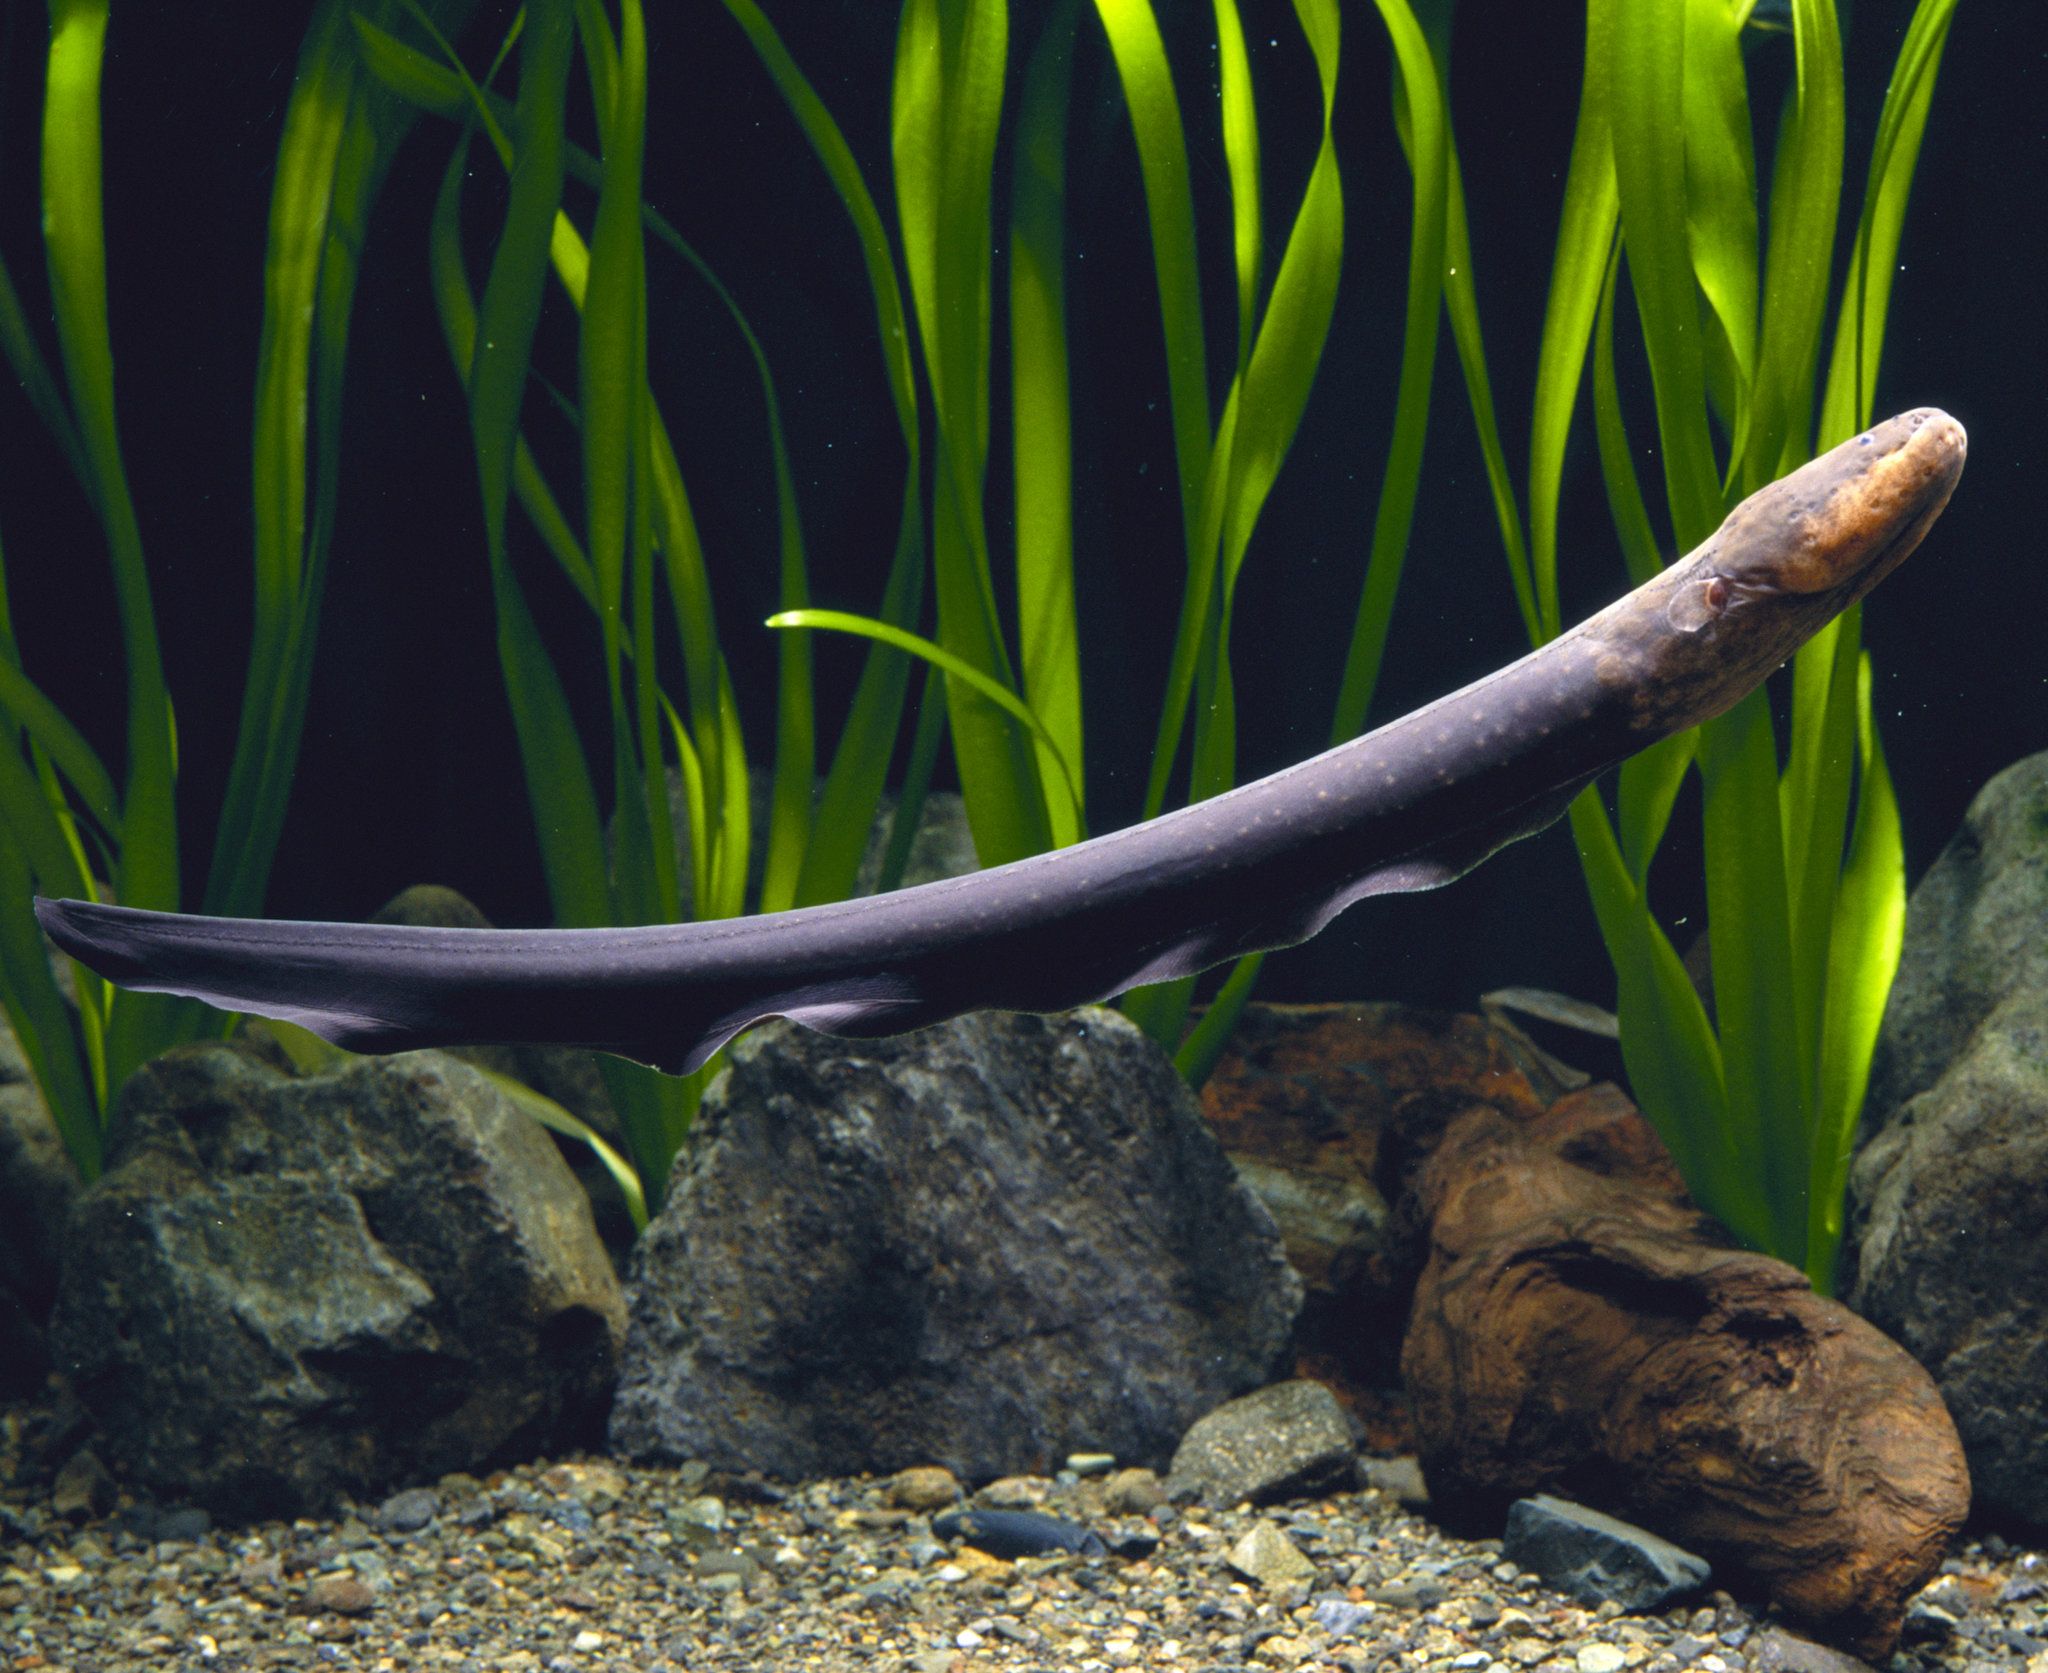 Like a Slimy Taser, Electric Eels Can Leap Out and Zap Their Prey